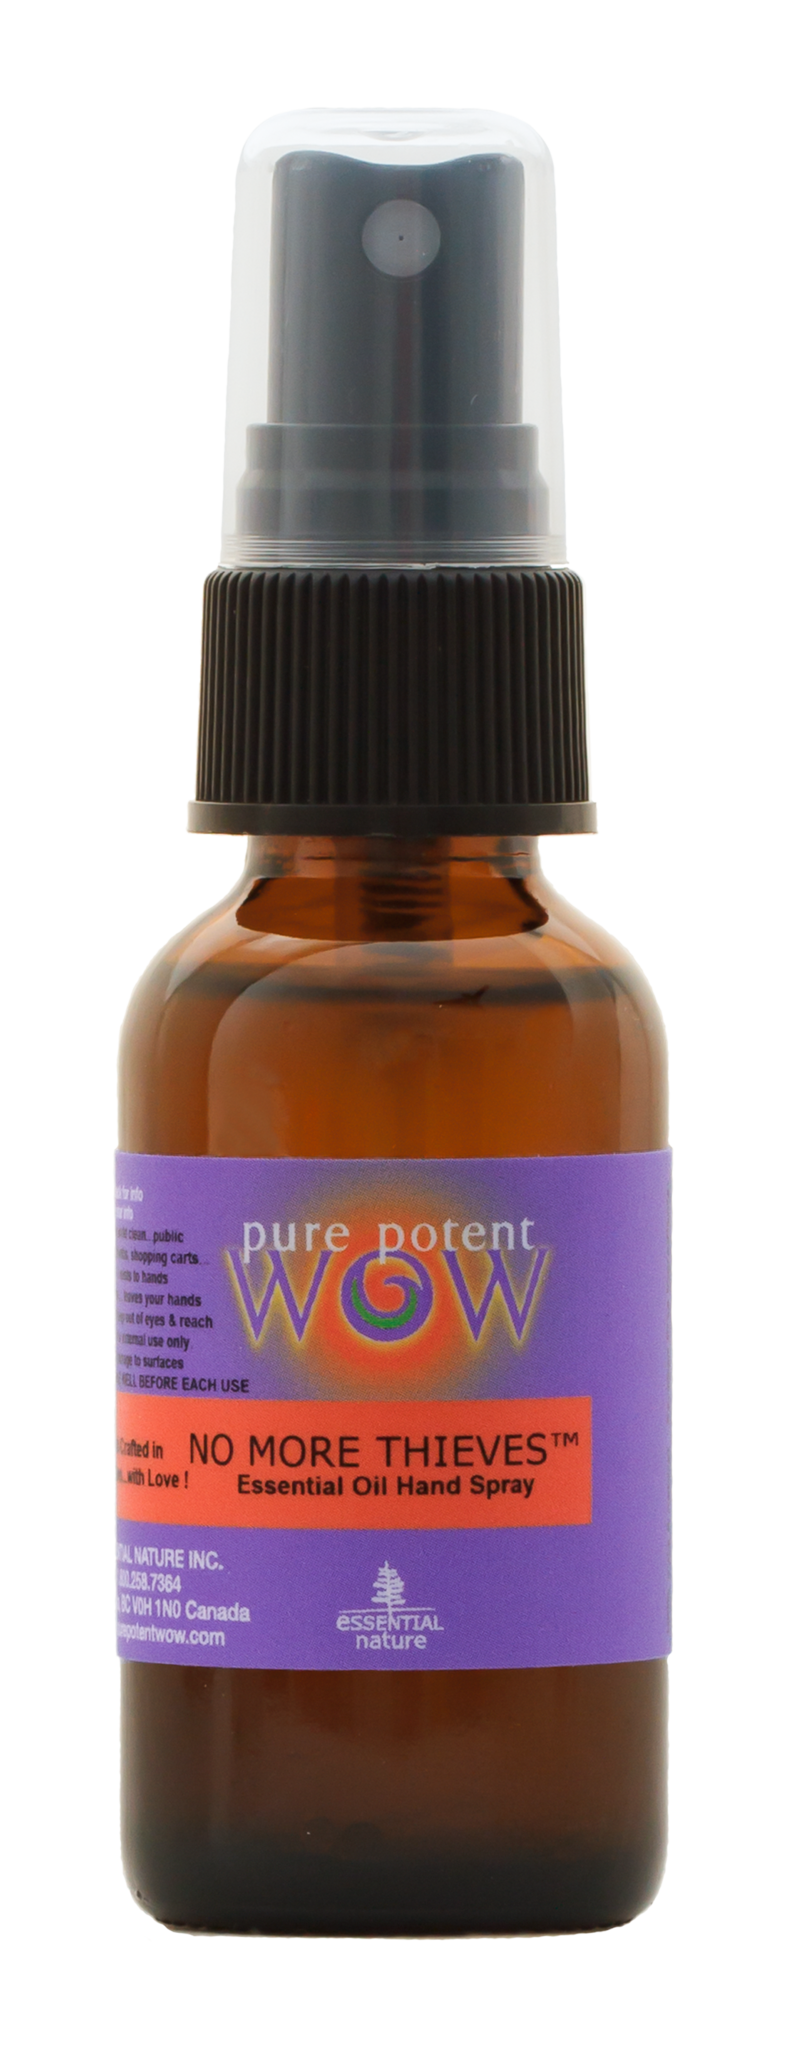 Pure Potent Wow No More Thieves Hand Spray